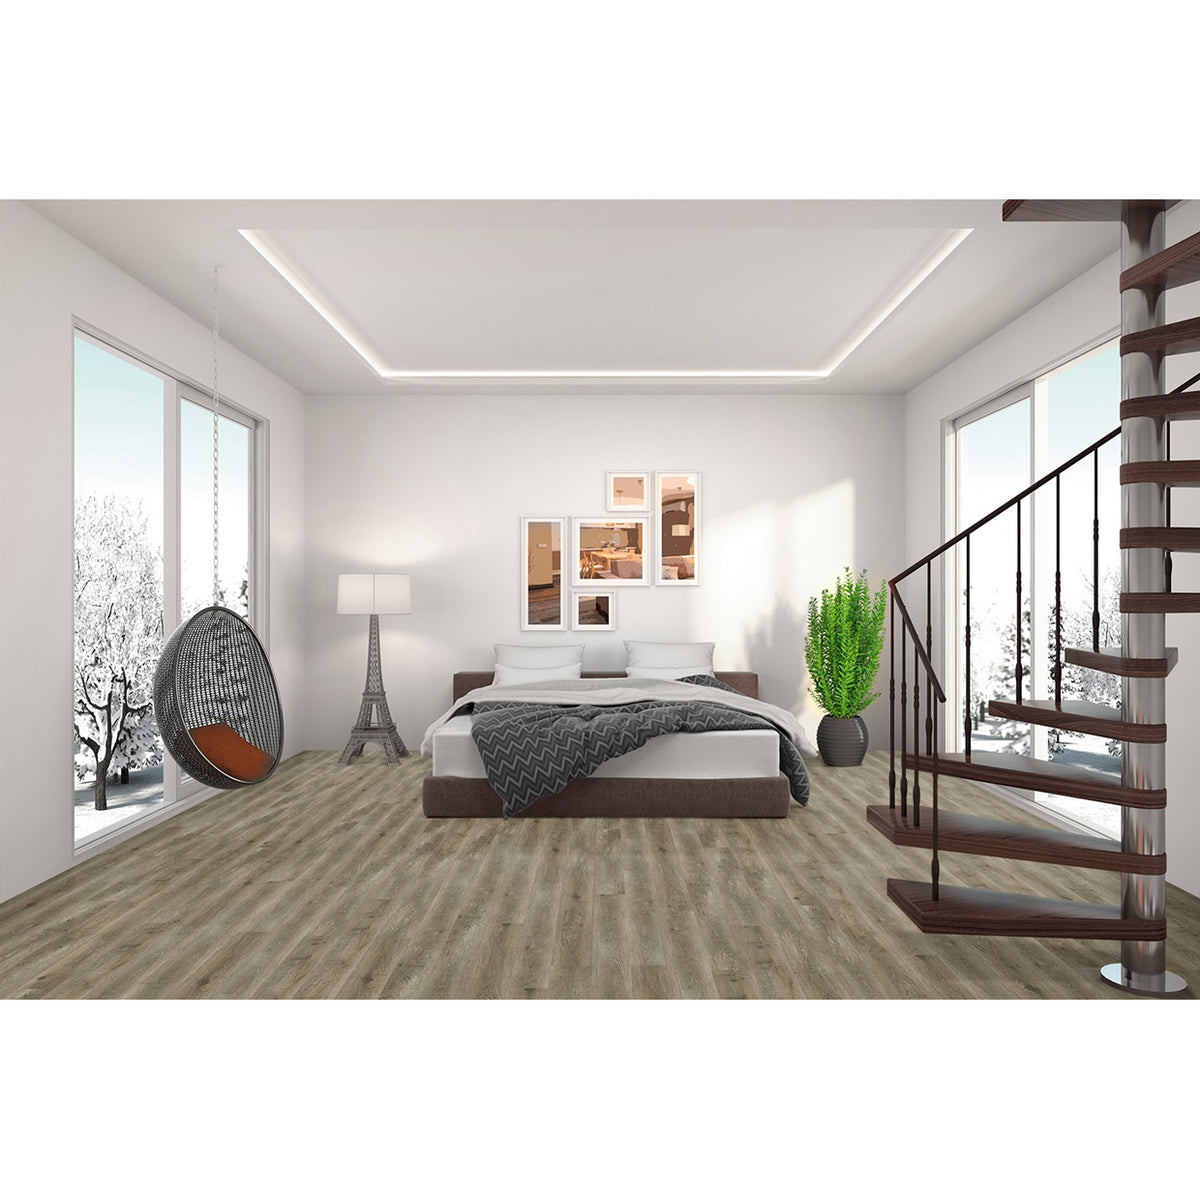 Axiscor - Axis Prime Plus - 7 in. x 48 in.  - Taupe Room Scene